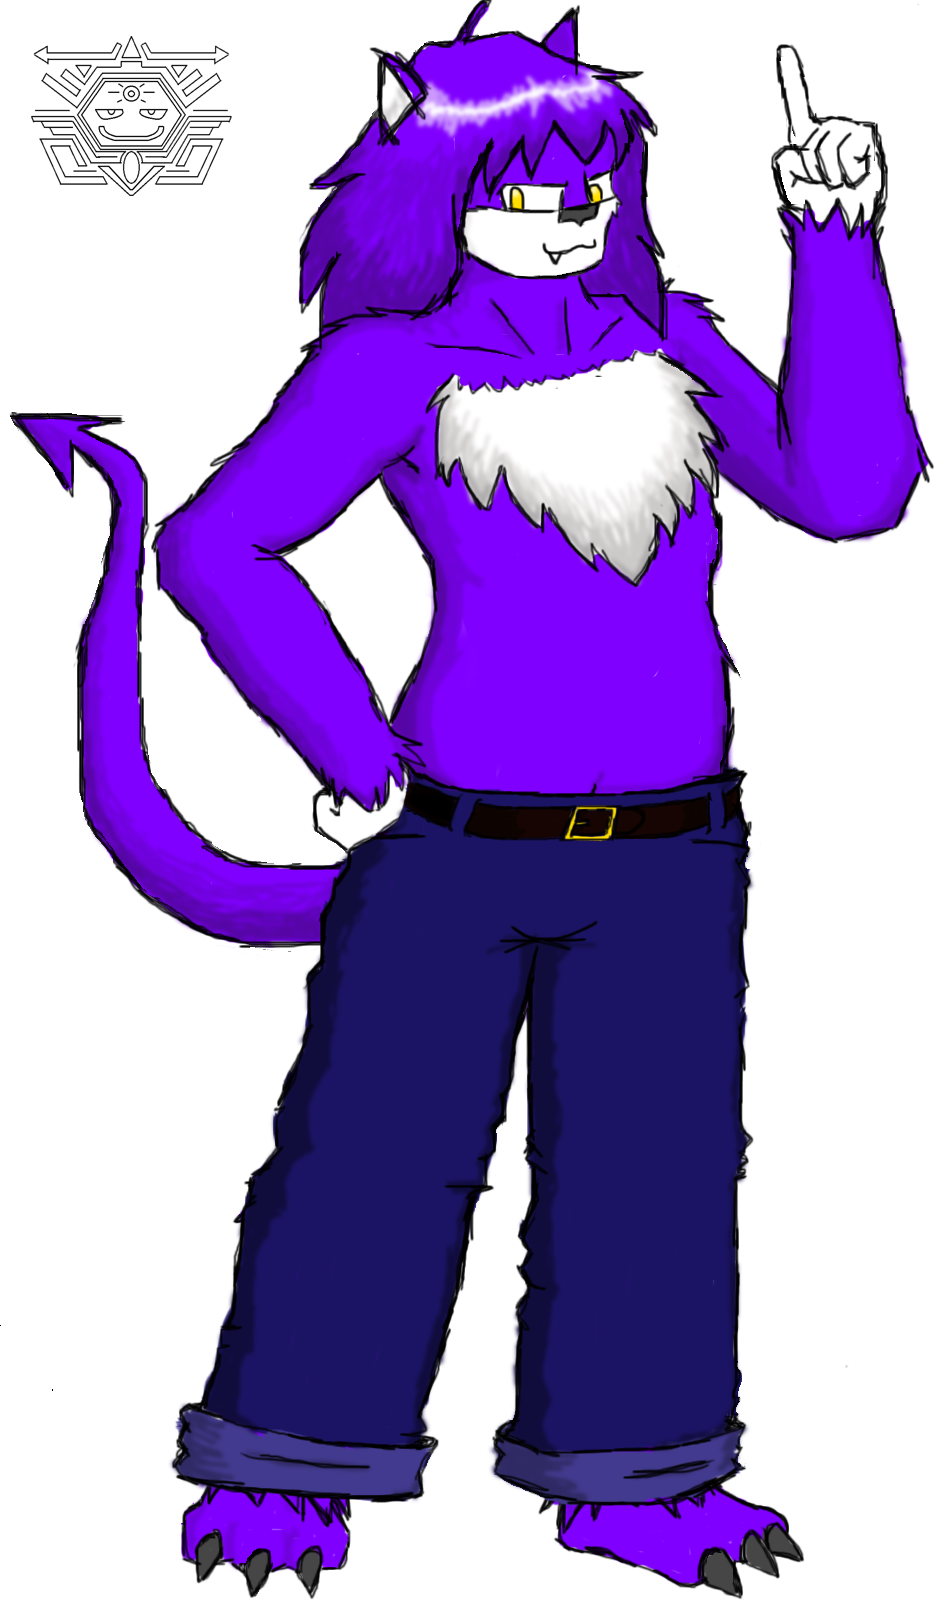 amidoinitrite bear big_feet cat claws clothed clothing devil_tail fang fangs fat feline fgsfds fluffy golden_eyes hair half-dressed hand_on_hip hedgehodge hexagon hexface index_finger indigo jeans lion logo long_hair mah_boi male mammal man noob overweight pants plain_background pointing purple purple_hair sego solo spade_tail topless white_background yellow_eyes